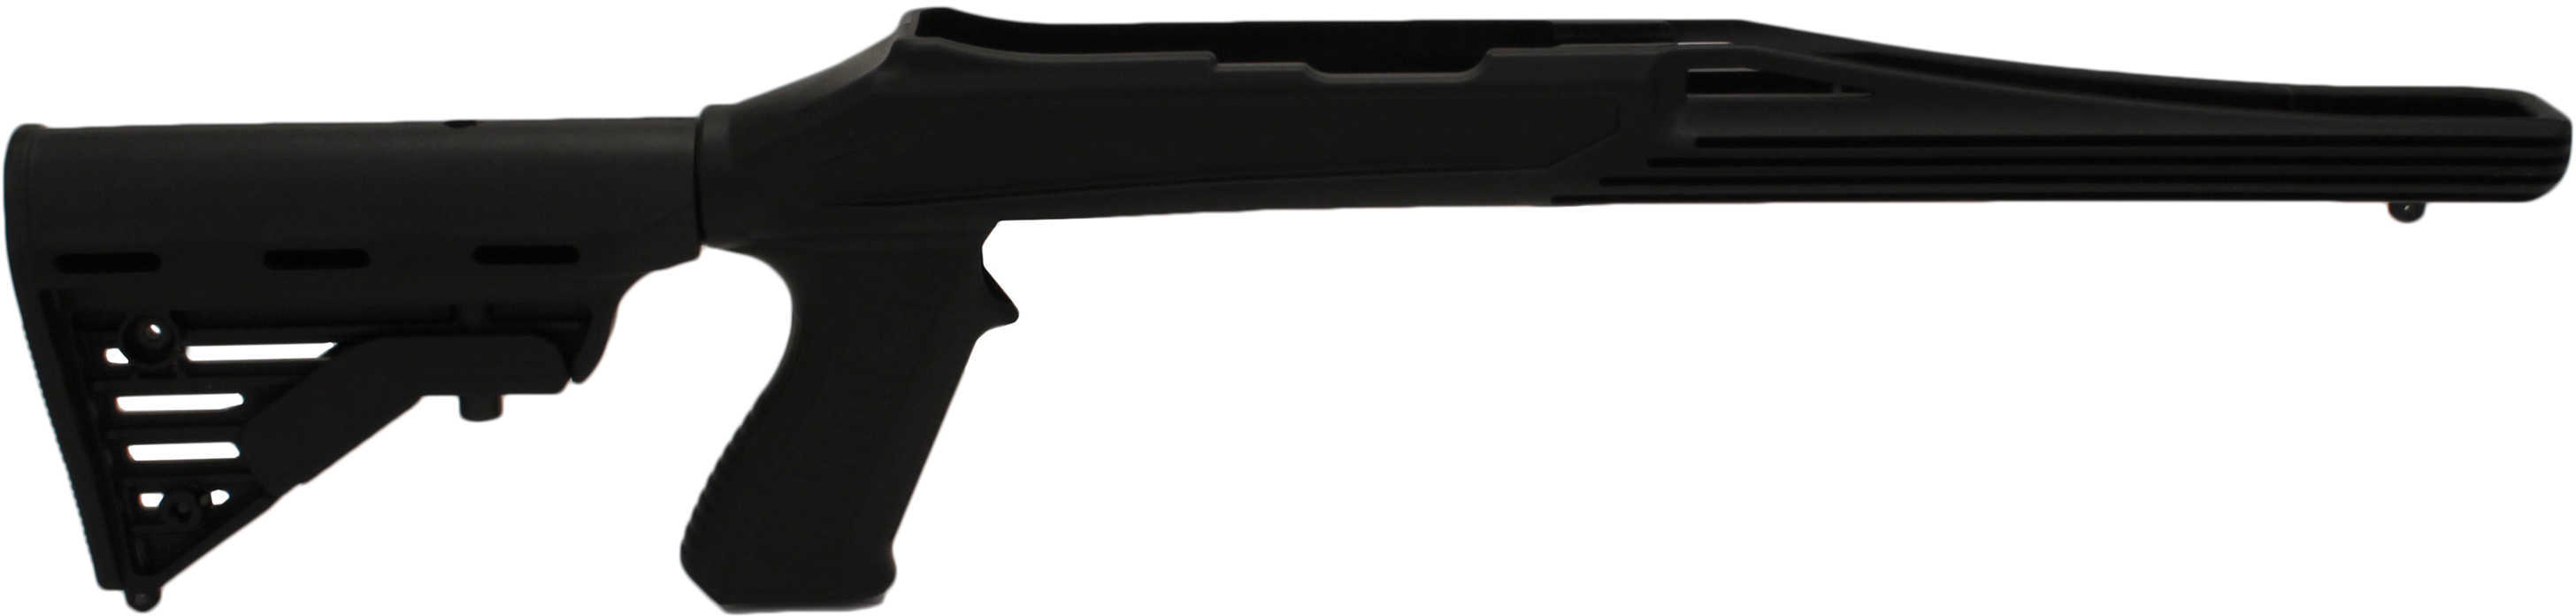 Knoxx Stock Axiom Ruger® 10/22® Black